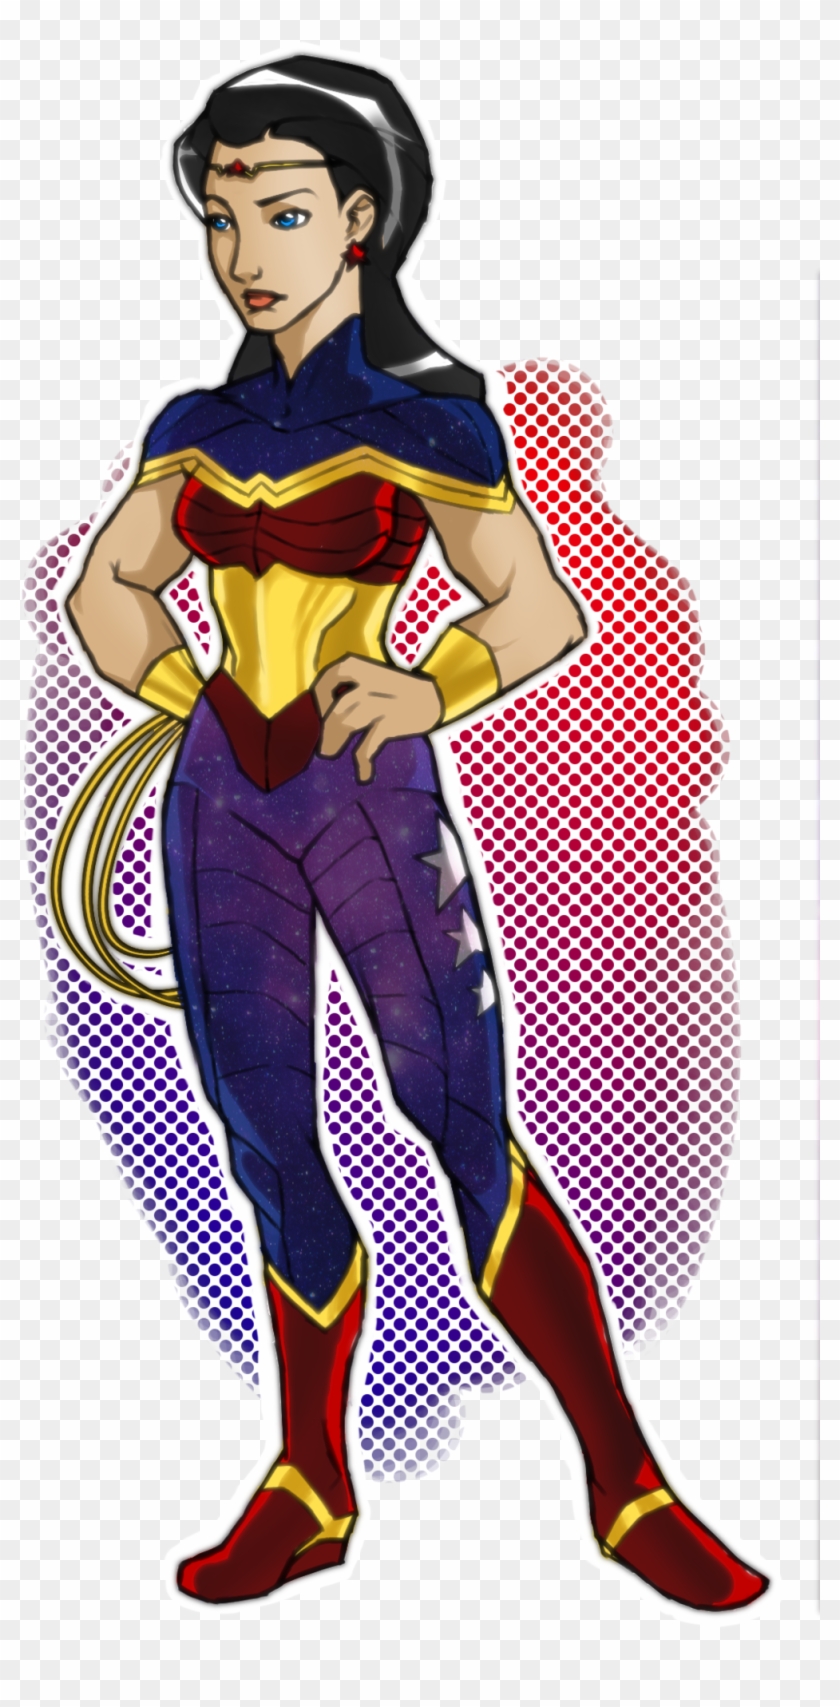 Wonder Woman Costume Redesign By Glory-day - Wonder Girl Costume Redesign #905639